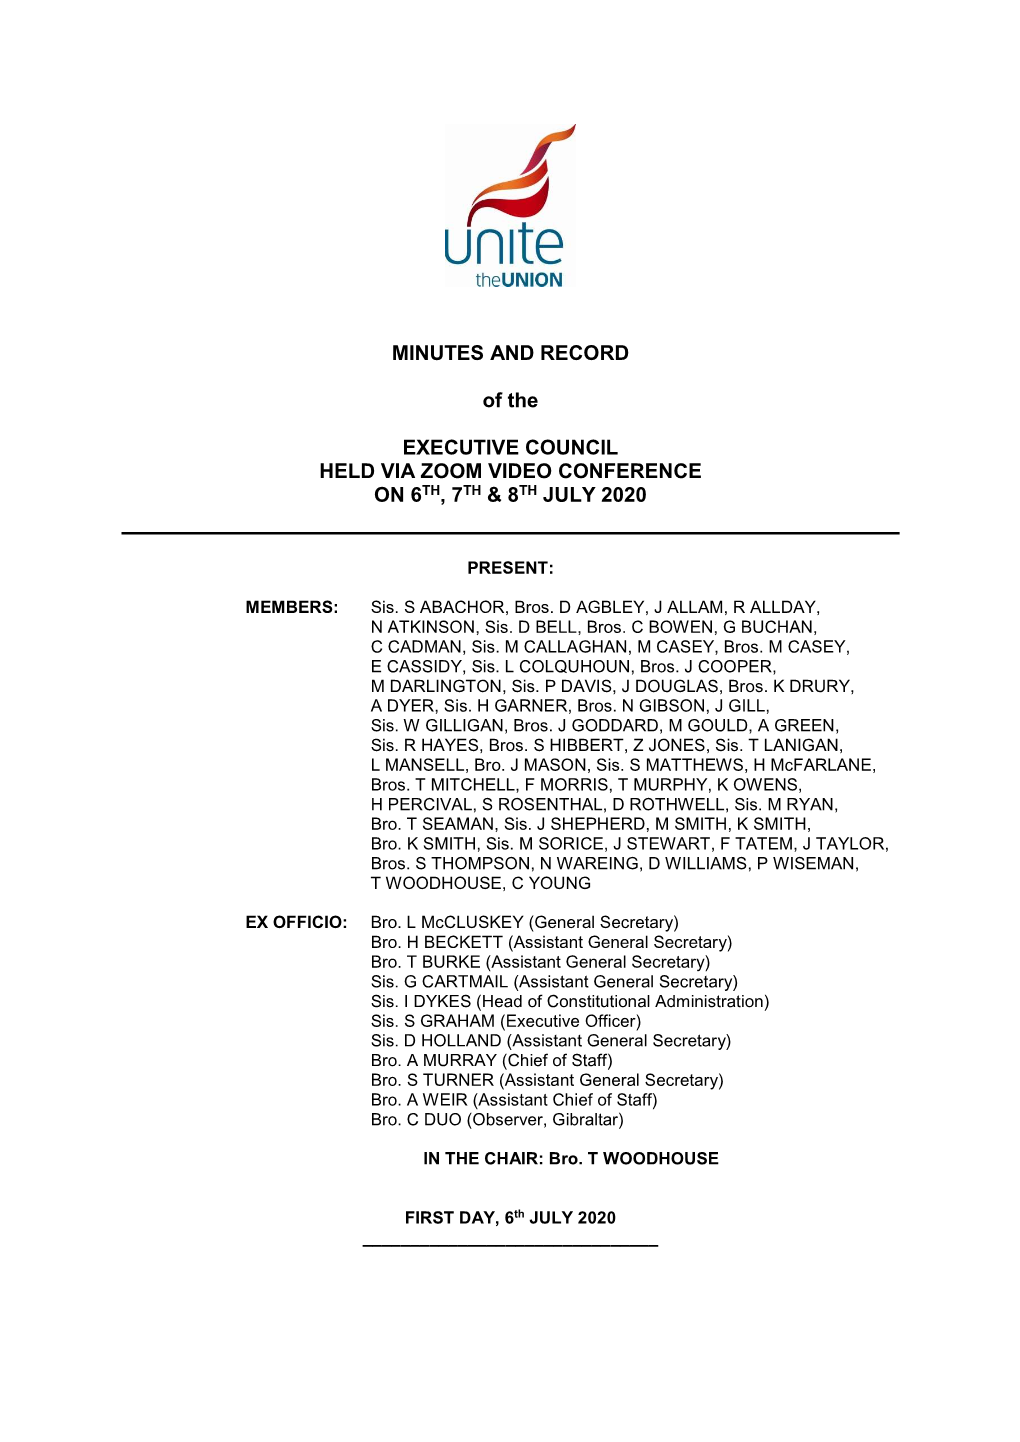 MINUTES and RECORD of the EXECUTIVE COUNCIL HELD VIA